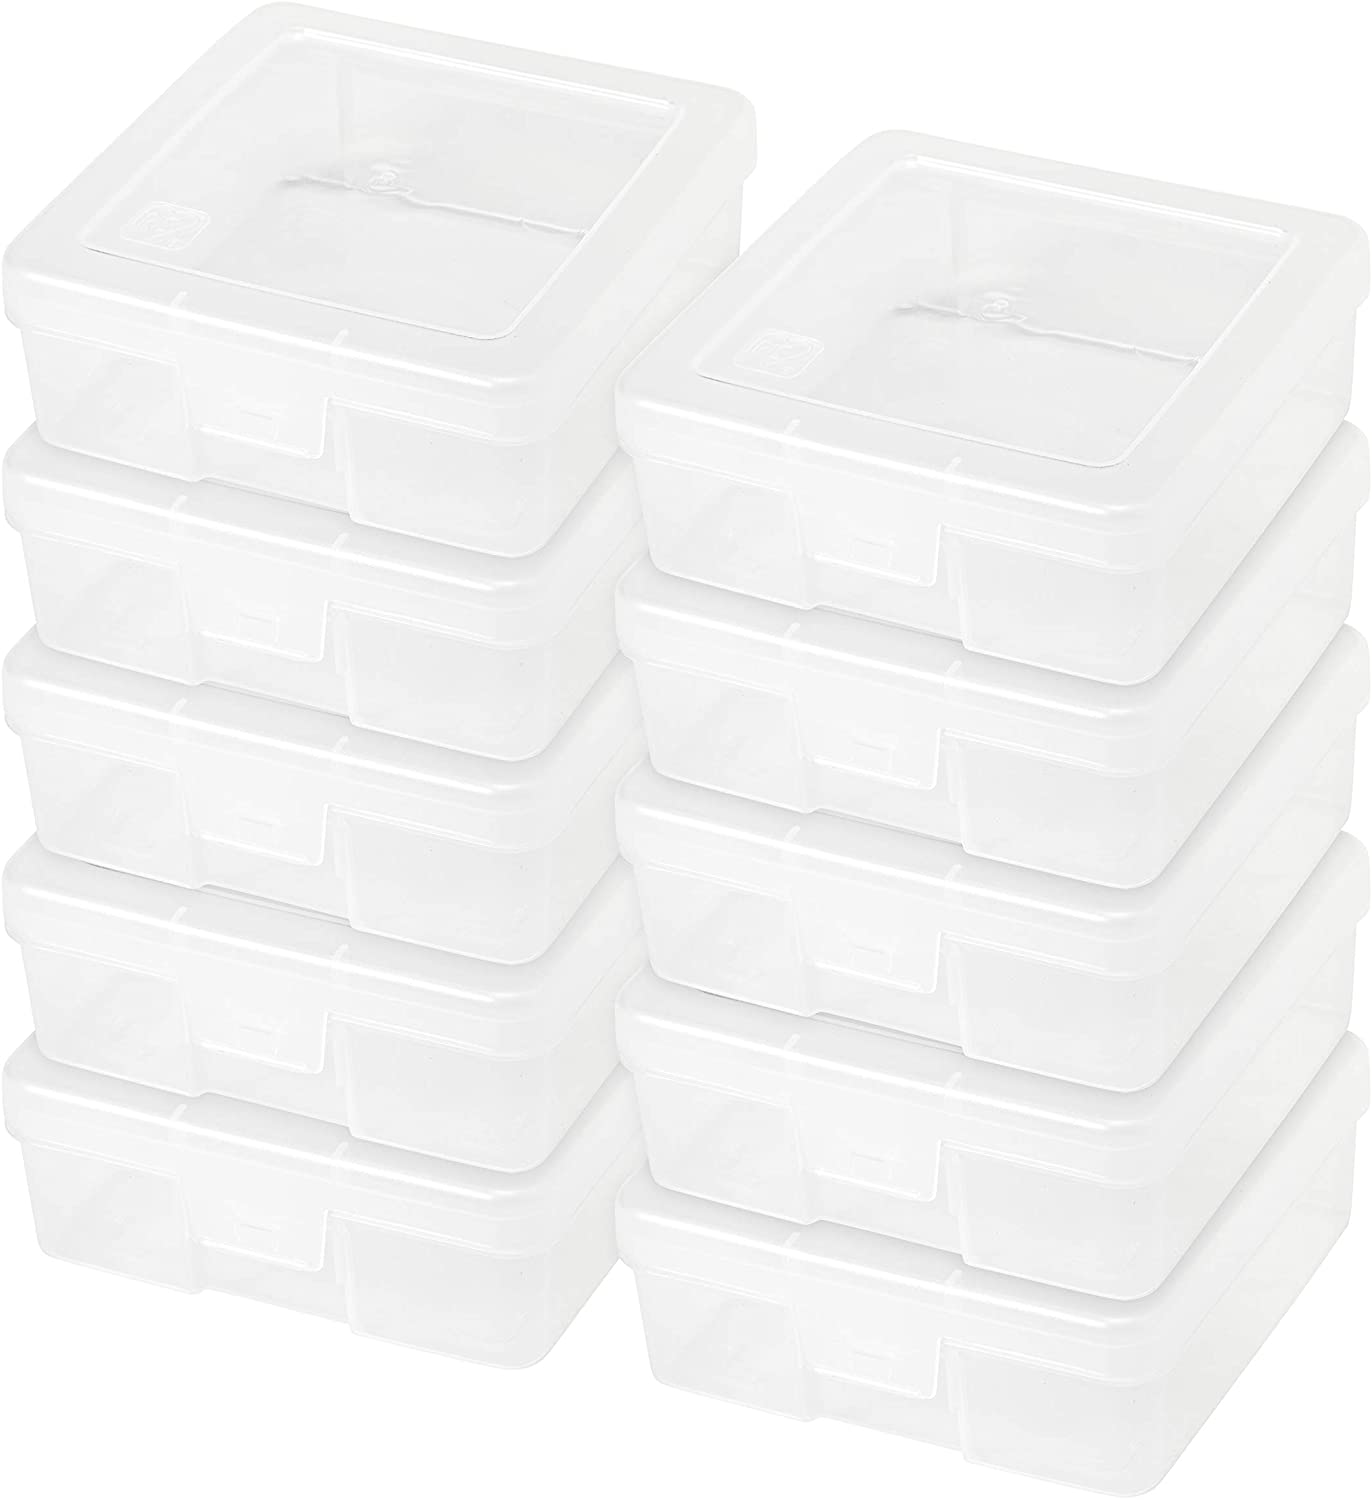 Modular Supply Case, PVC-Free ,Large,10 Pack, Clear